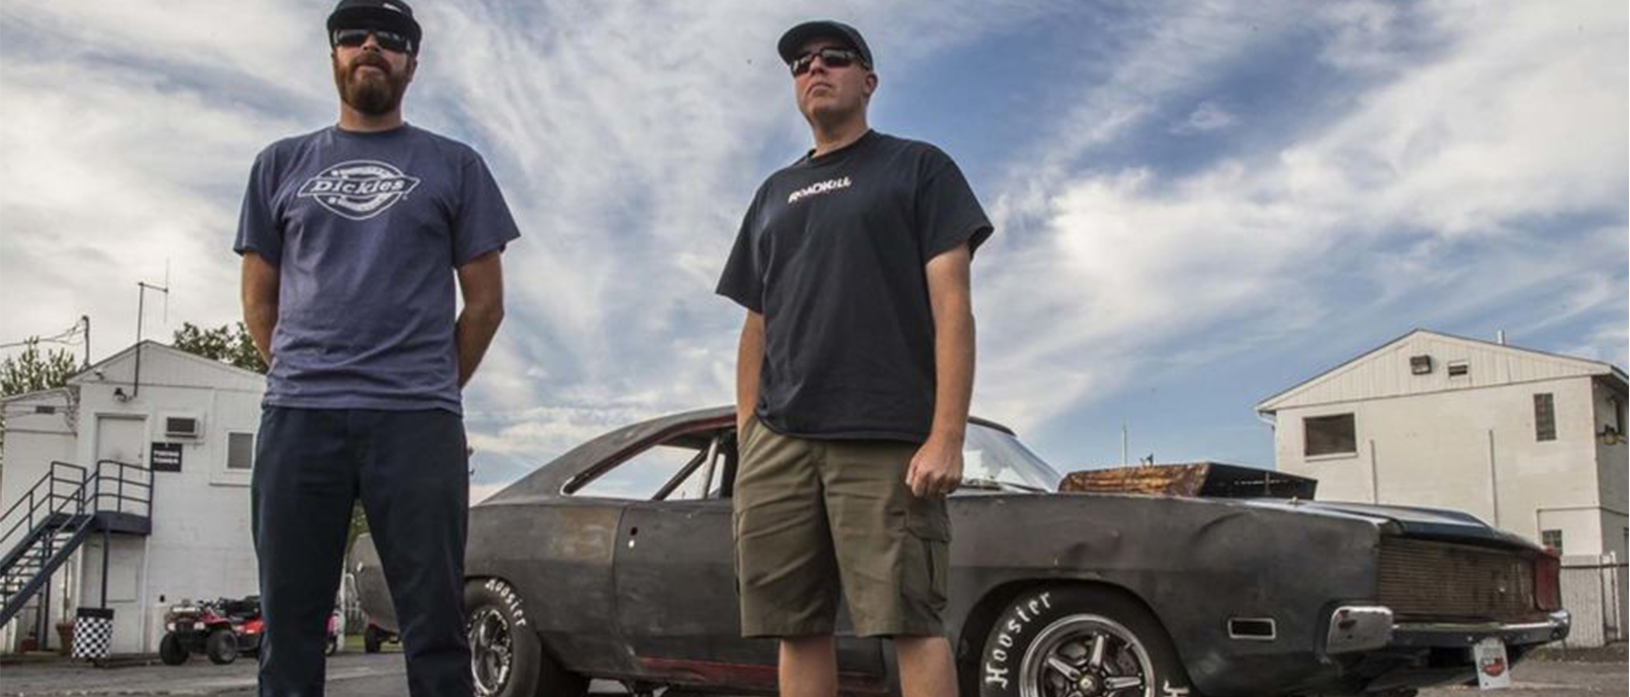 David Freiburger and Michael Finnegan standing with a car